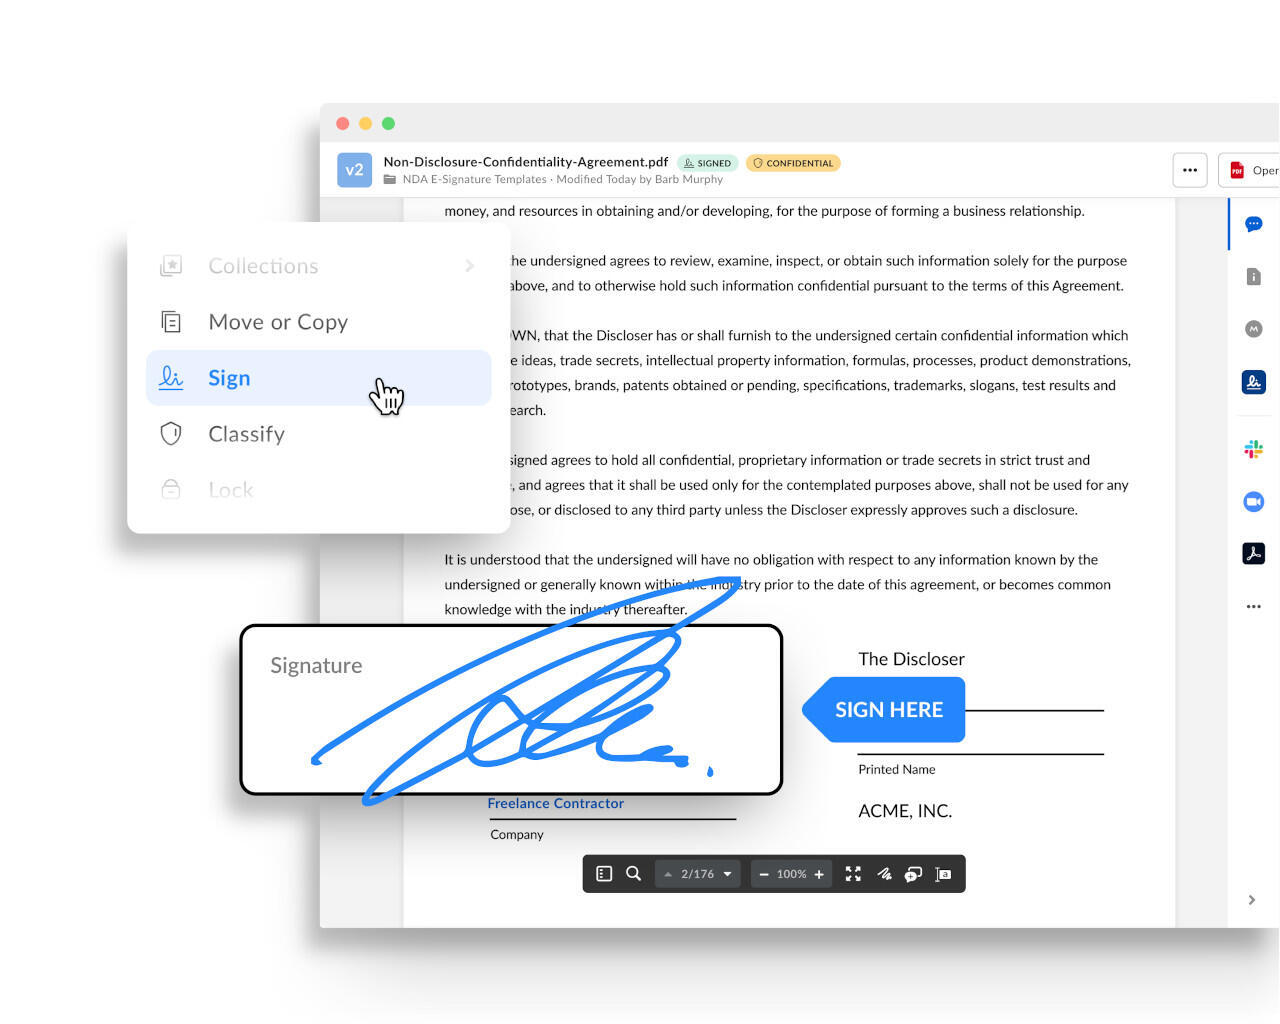 Box Sign brings integrated e-signatures to the Box platform